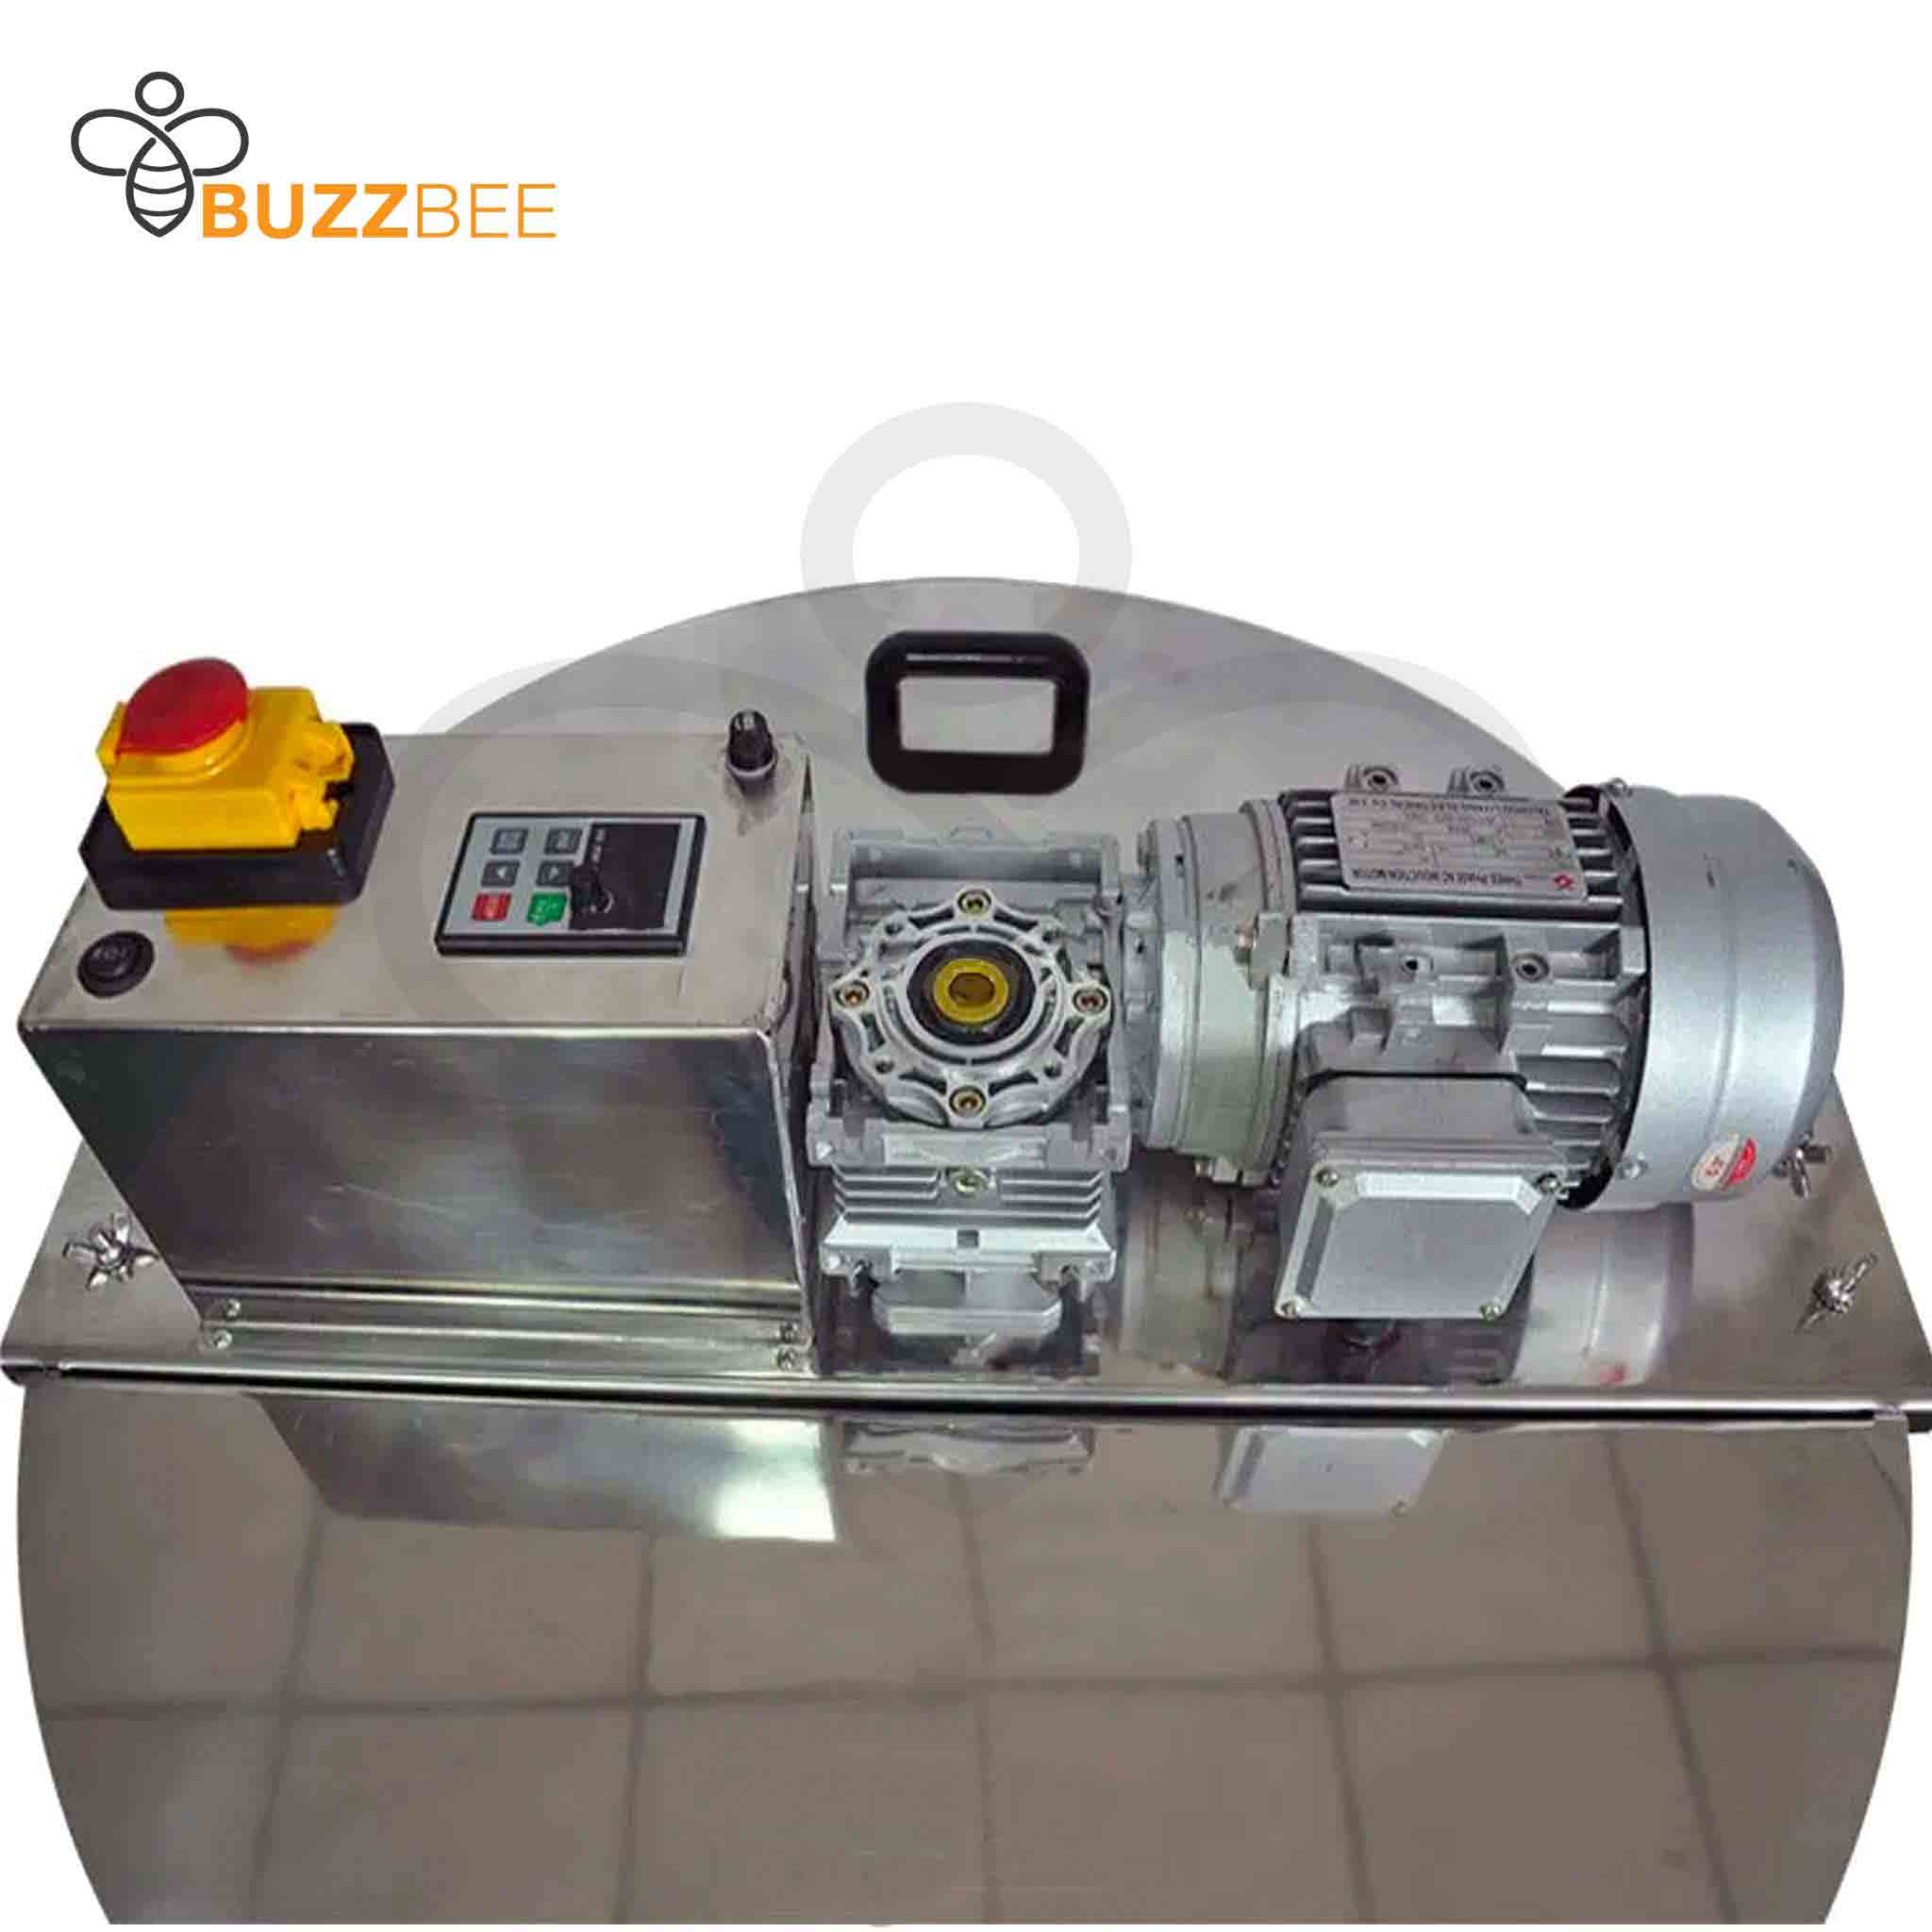 Buzzbee Electric 12 Frame Honey Extractor MK2 (Fully Automatic) - Processing collection by Buzzbee Beekeeping Supplies